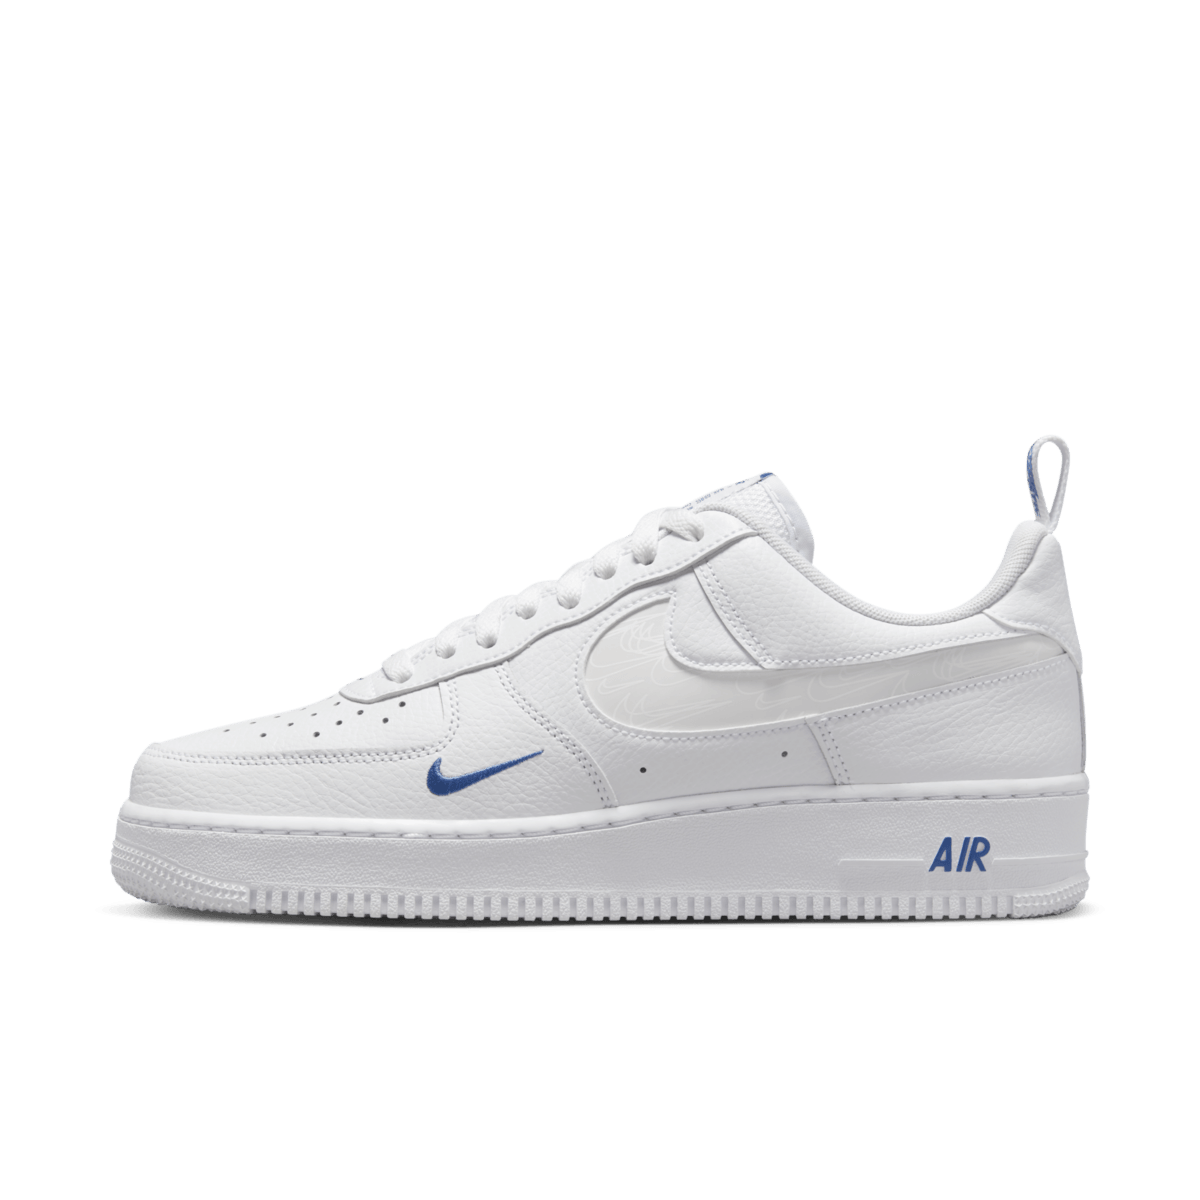 Nike Air Force 1 Low Reflective Swoosh White Blue FB8971-100